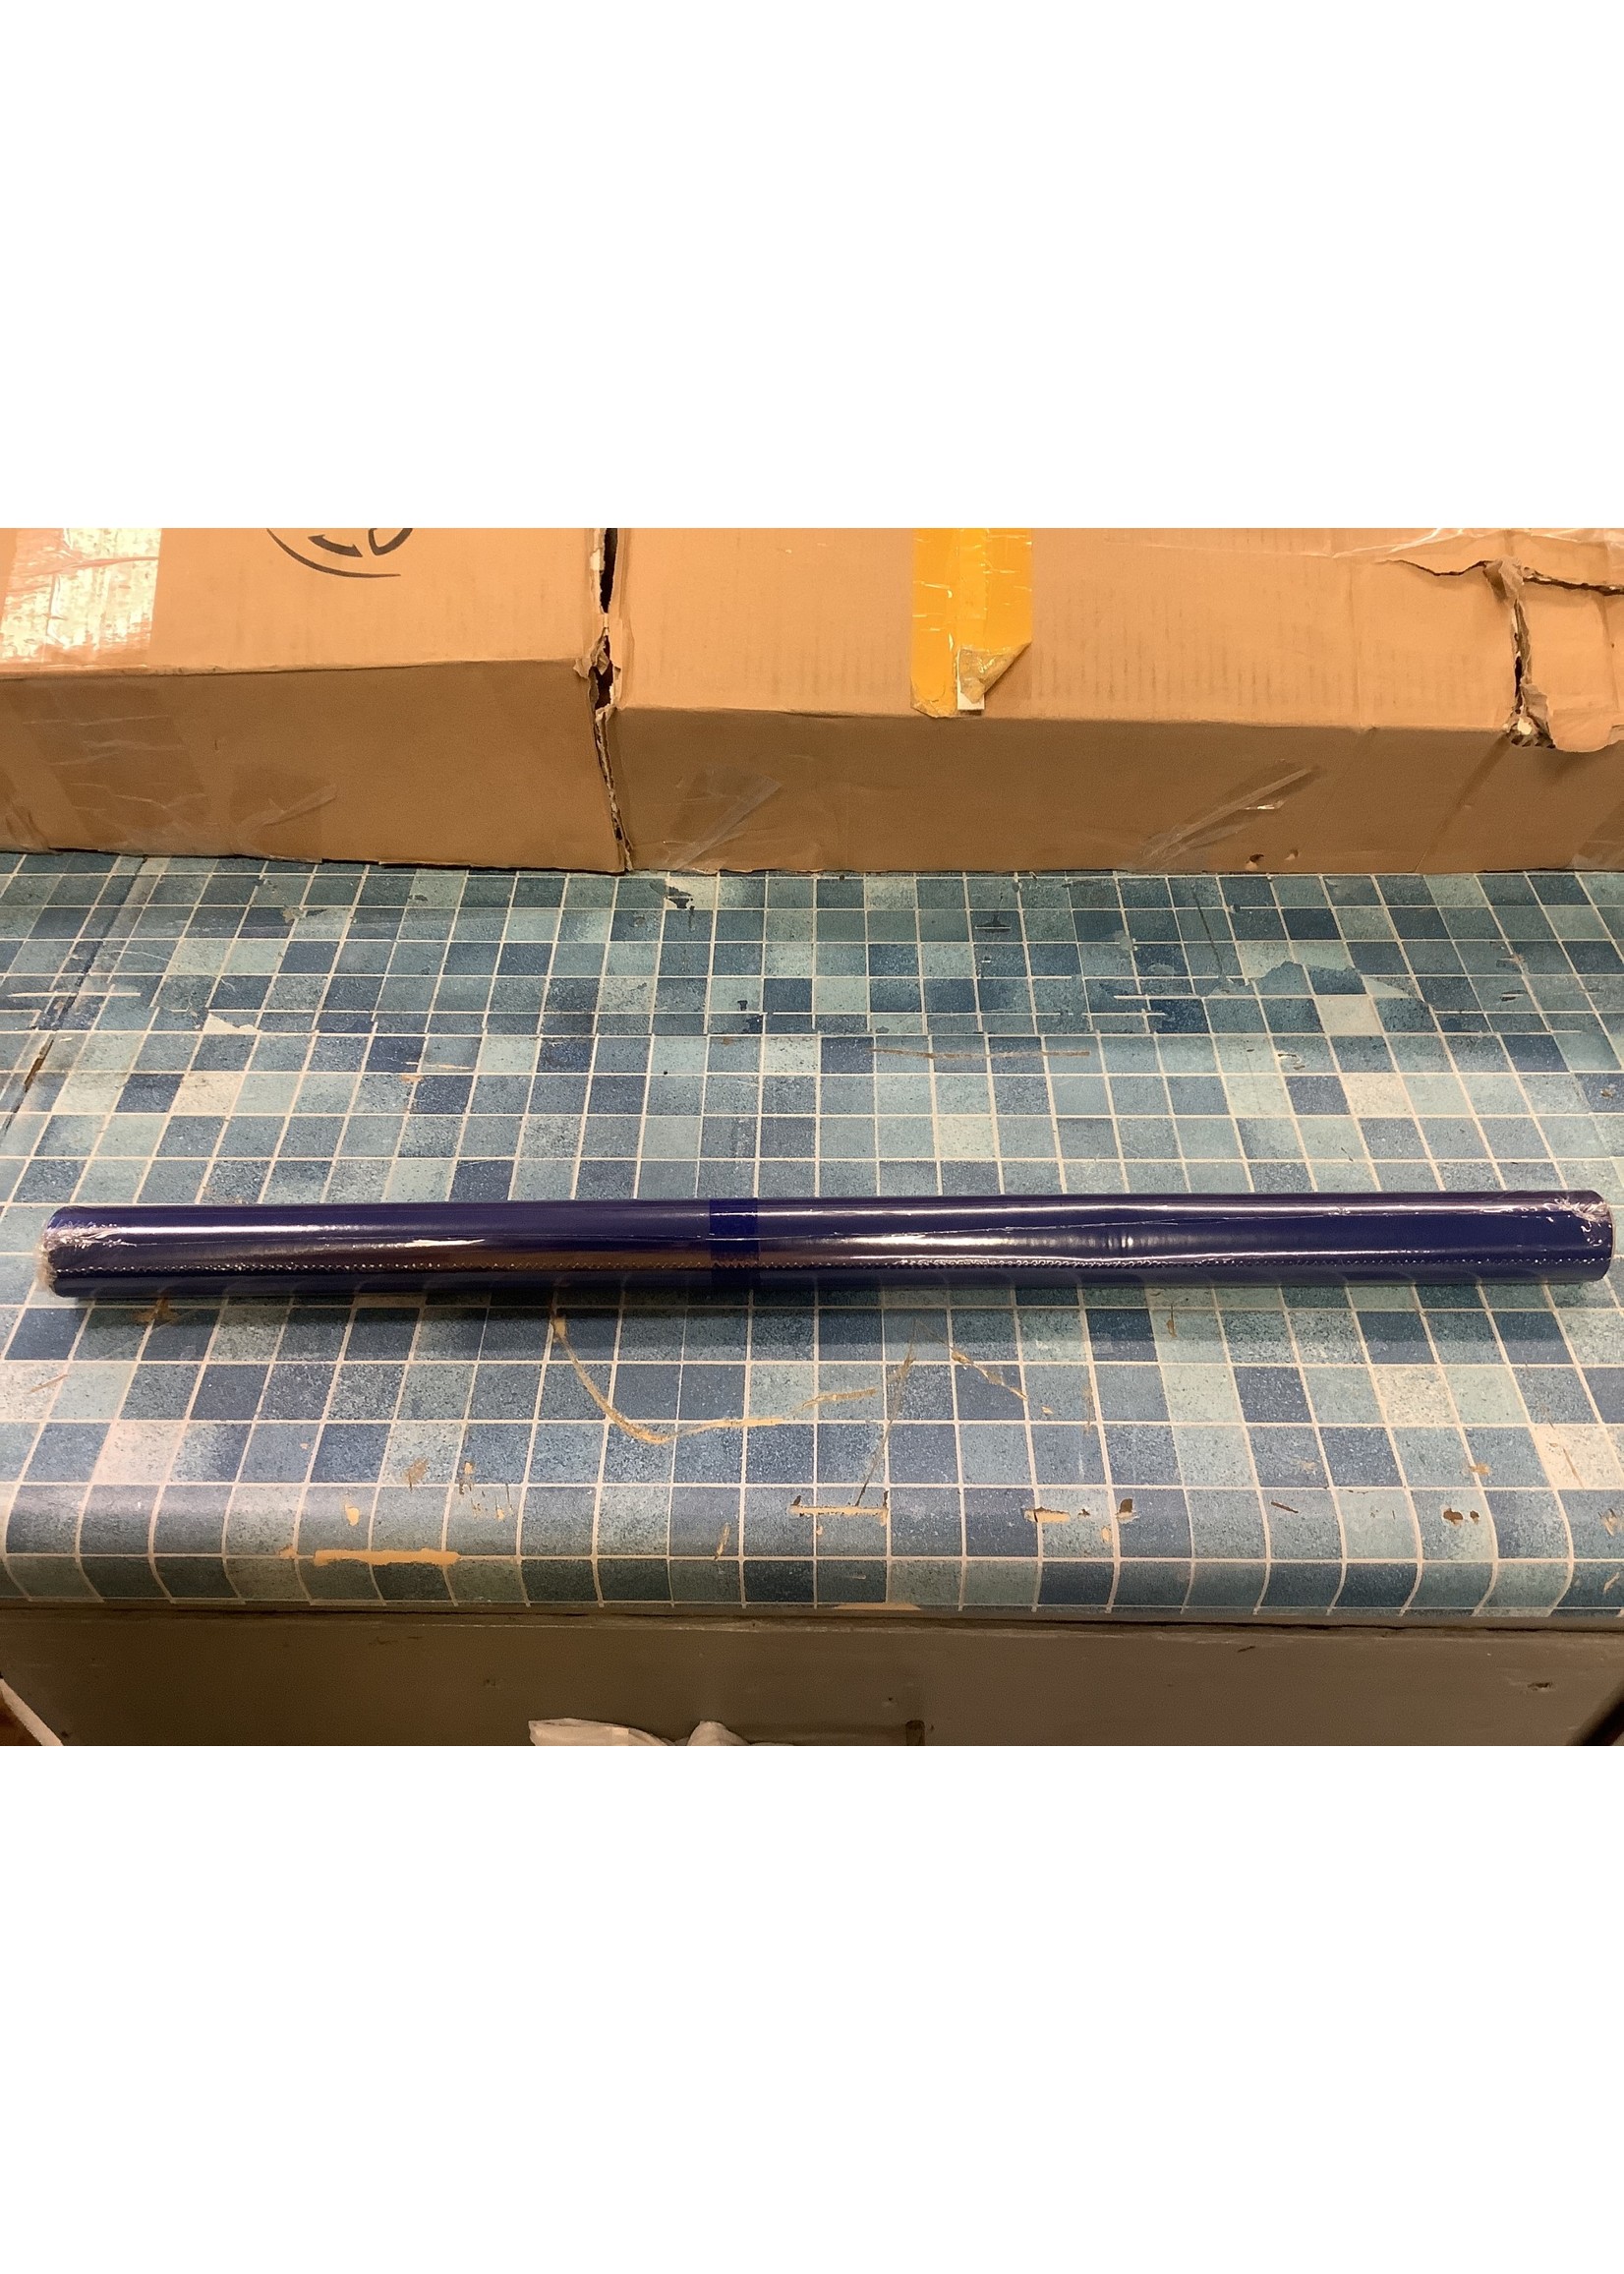 24”x60” Blue Wrapping Paper